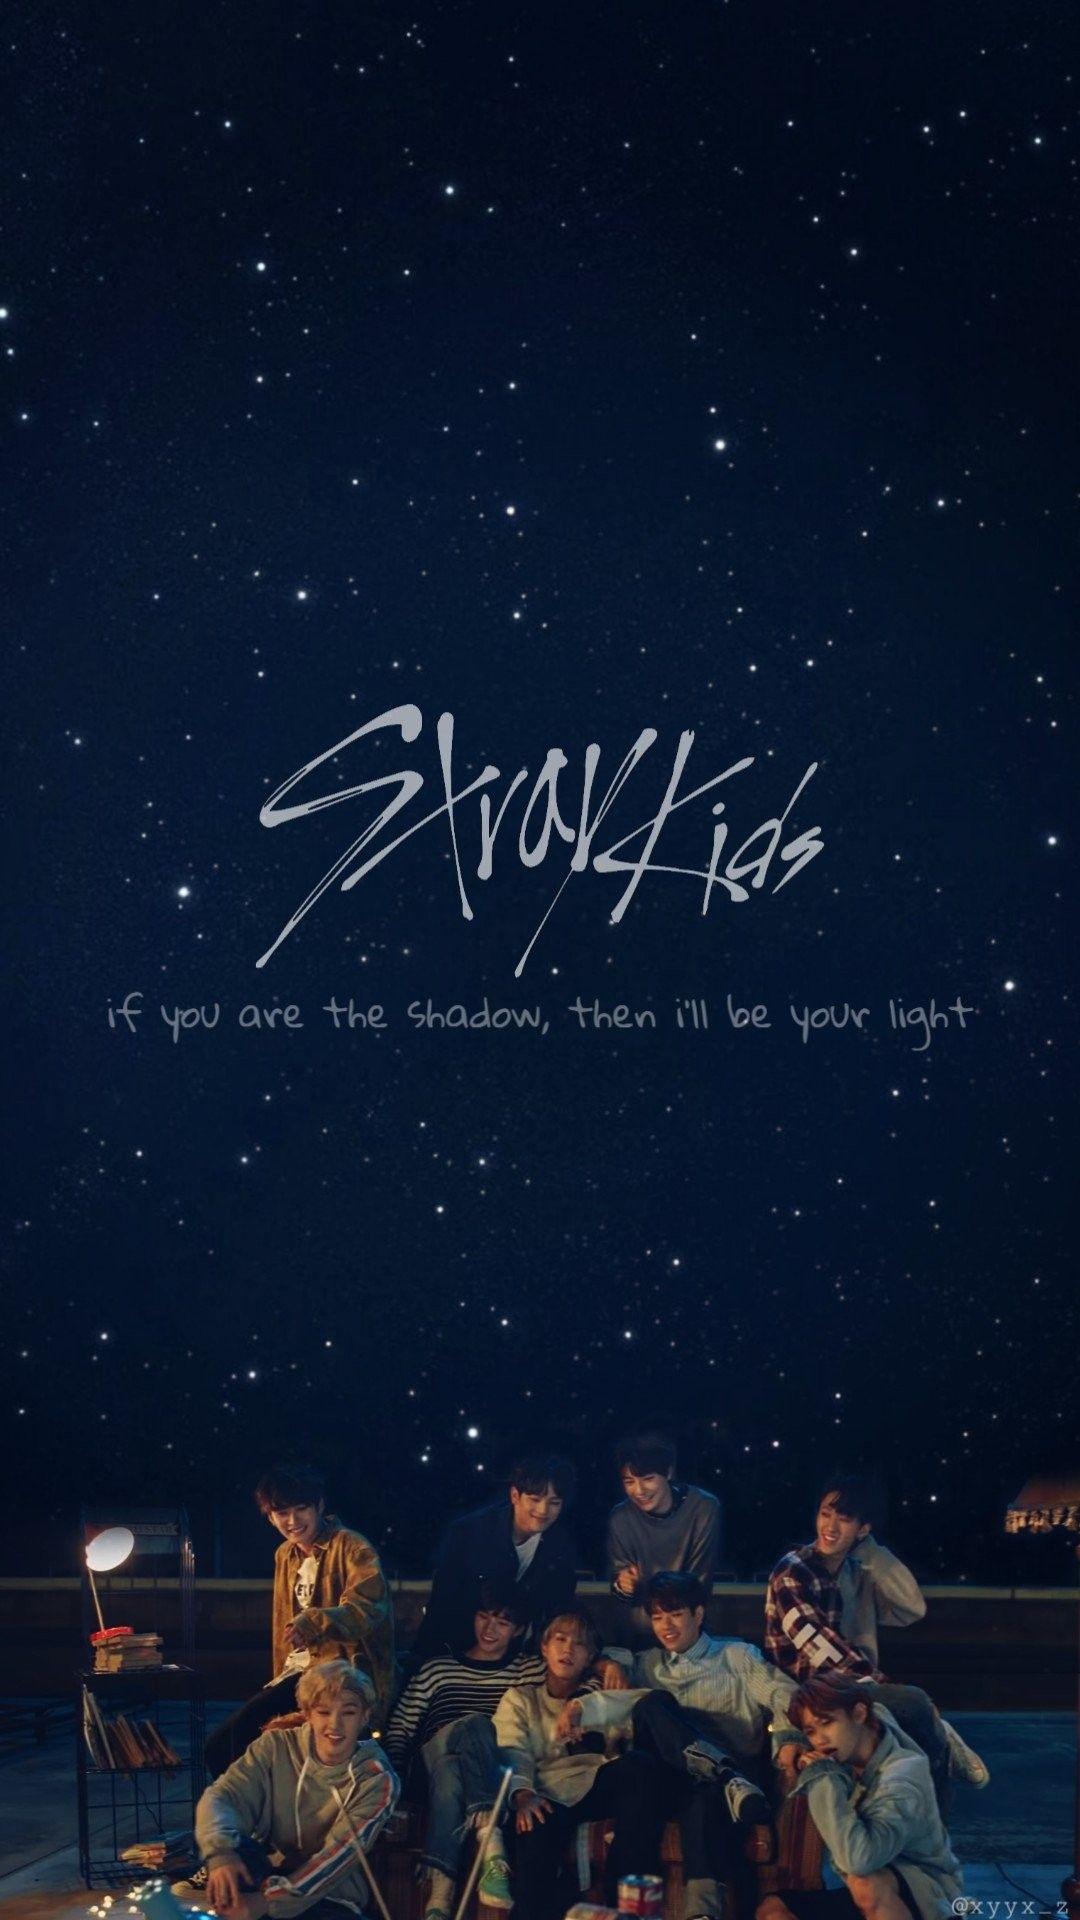 download free stray on switch